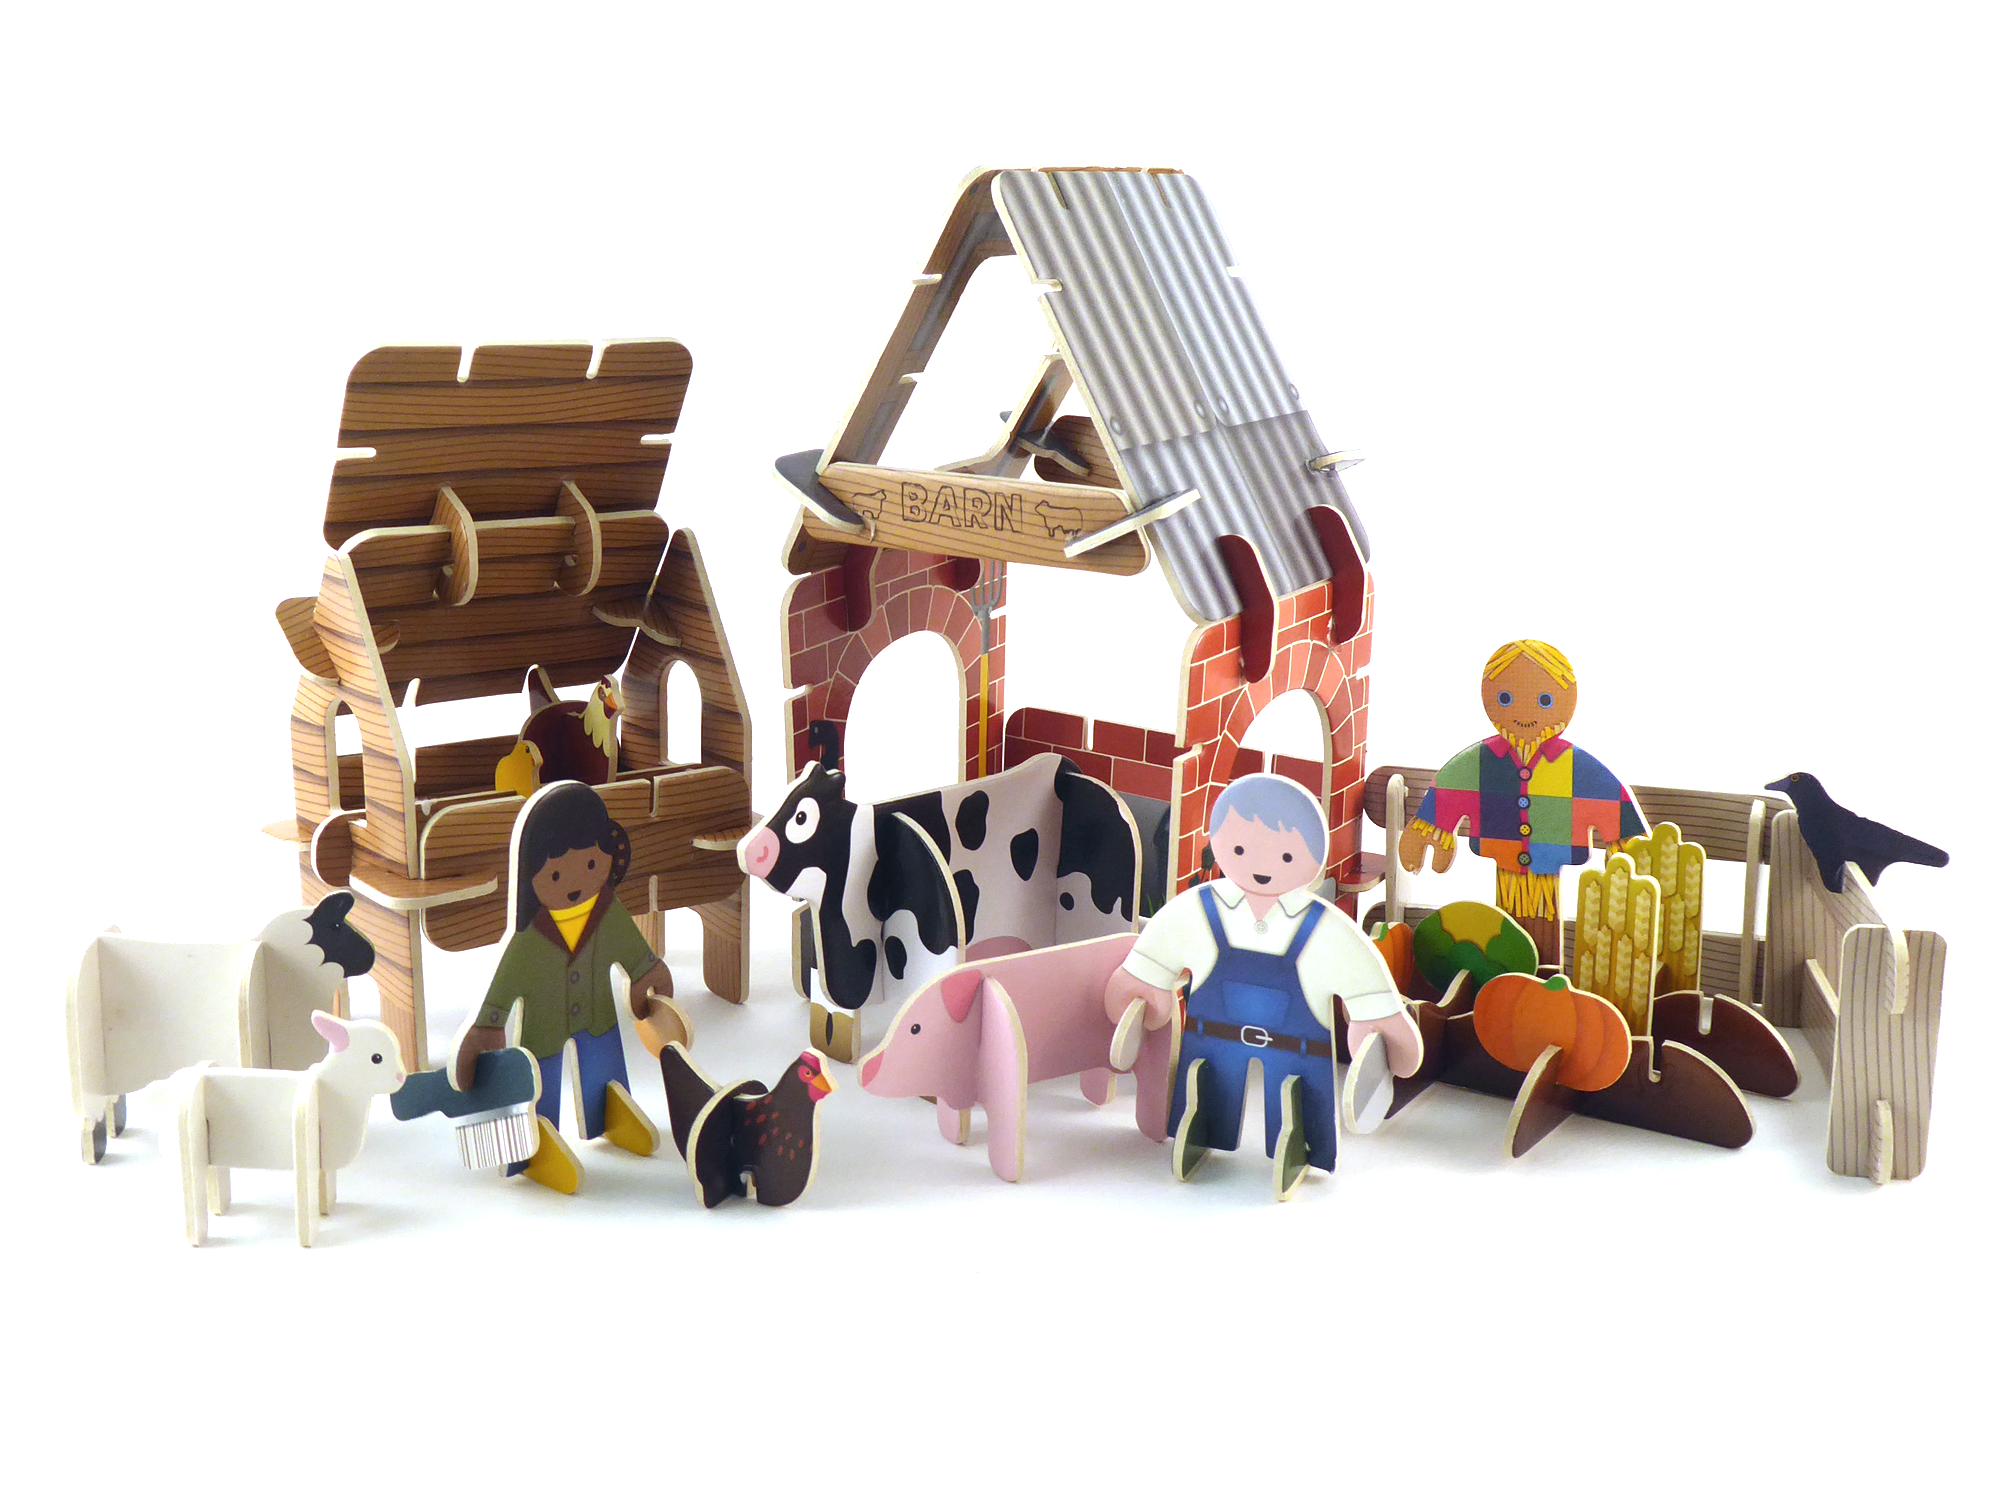 3d Model of Play Press farm set with animal and people figures